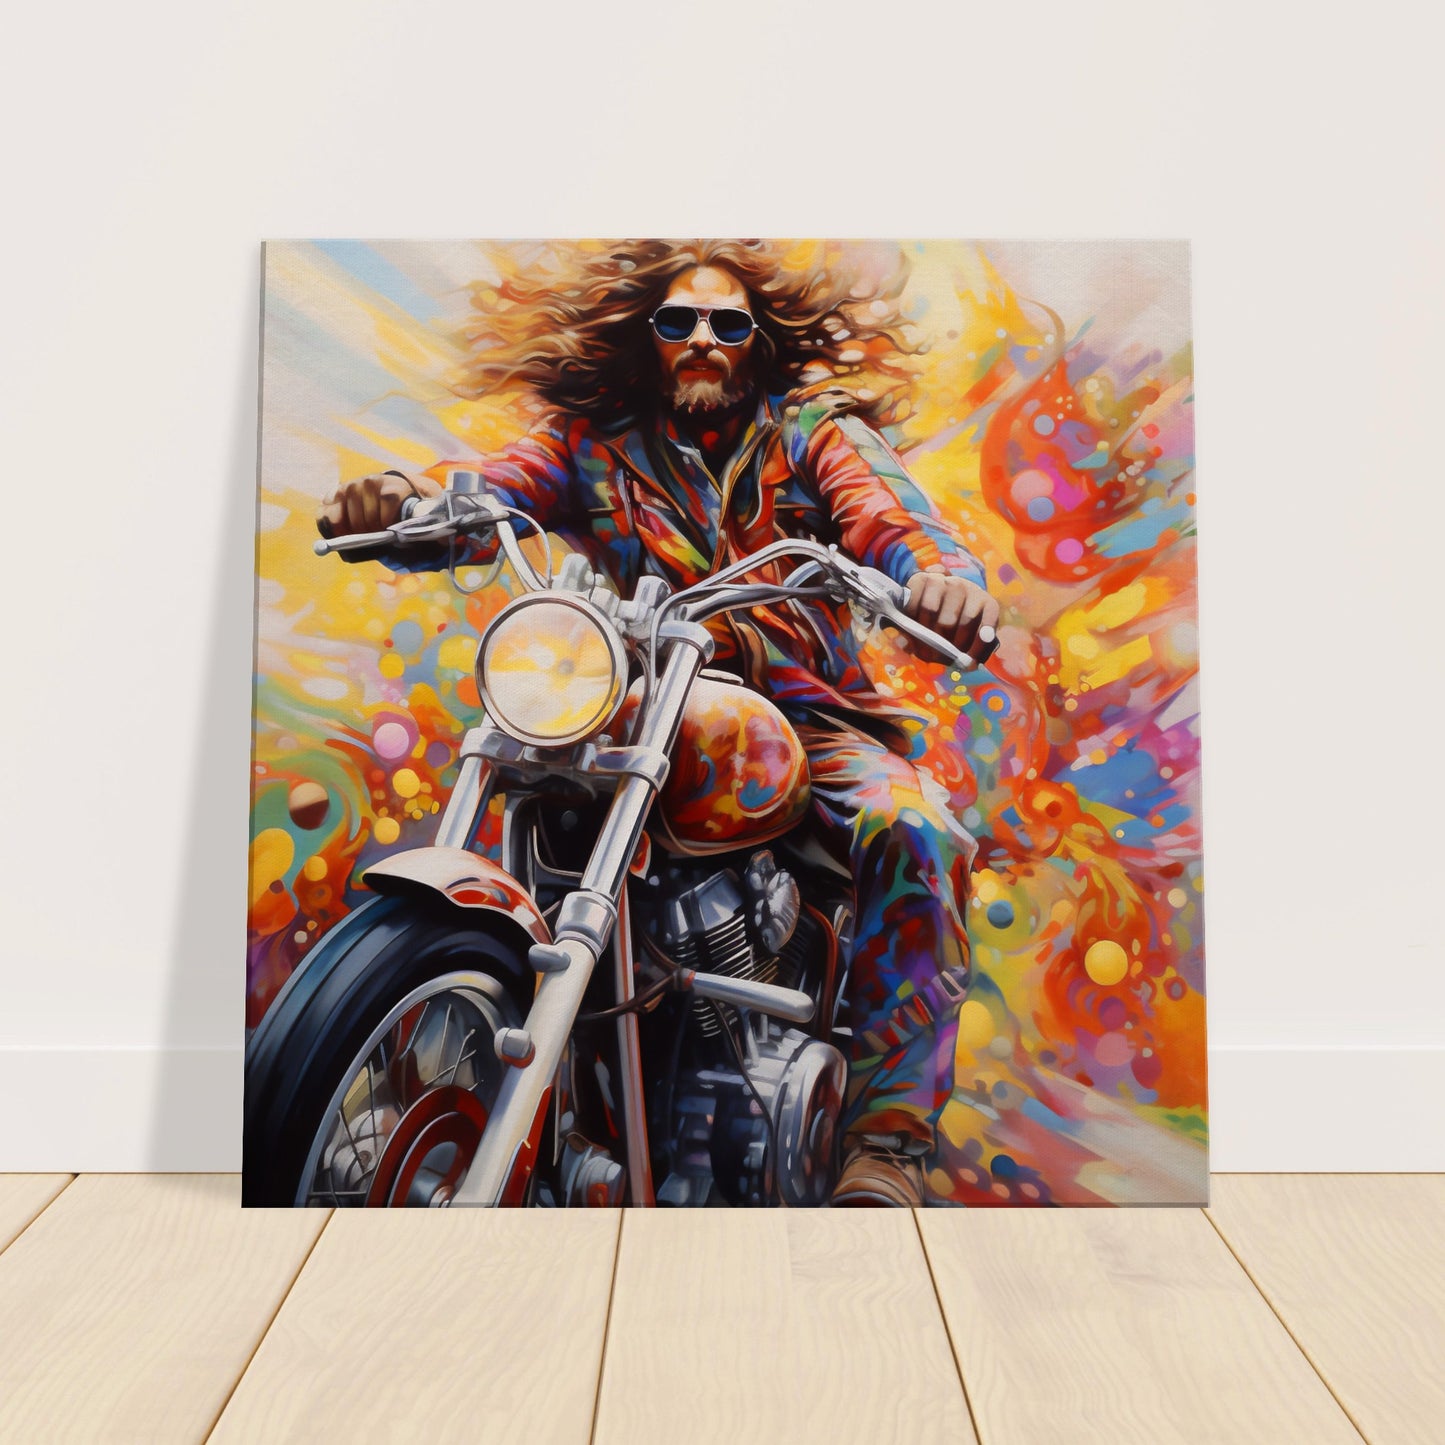 Motorcycle Freedom Canvas Print: A Psychedelic Journey of Liberation